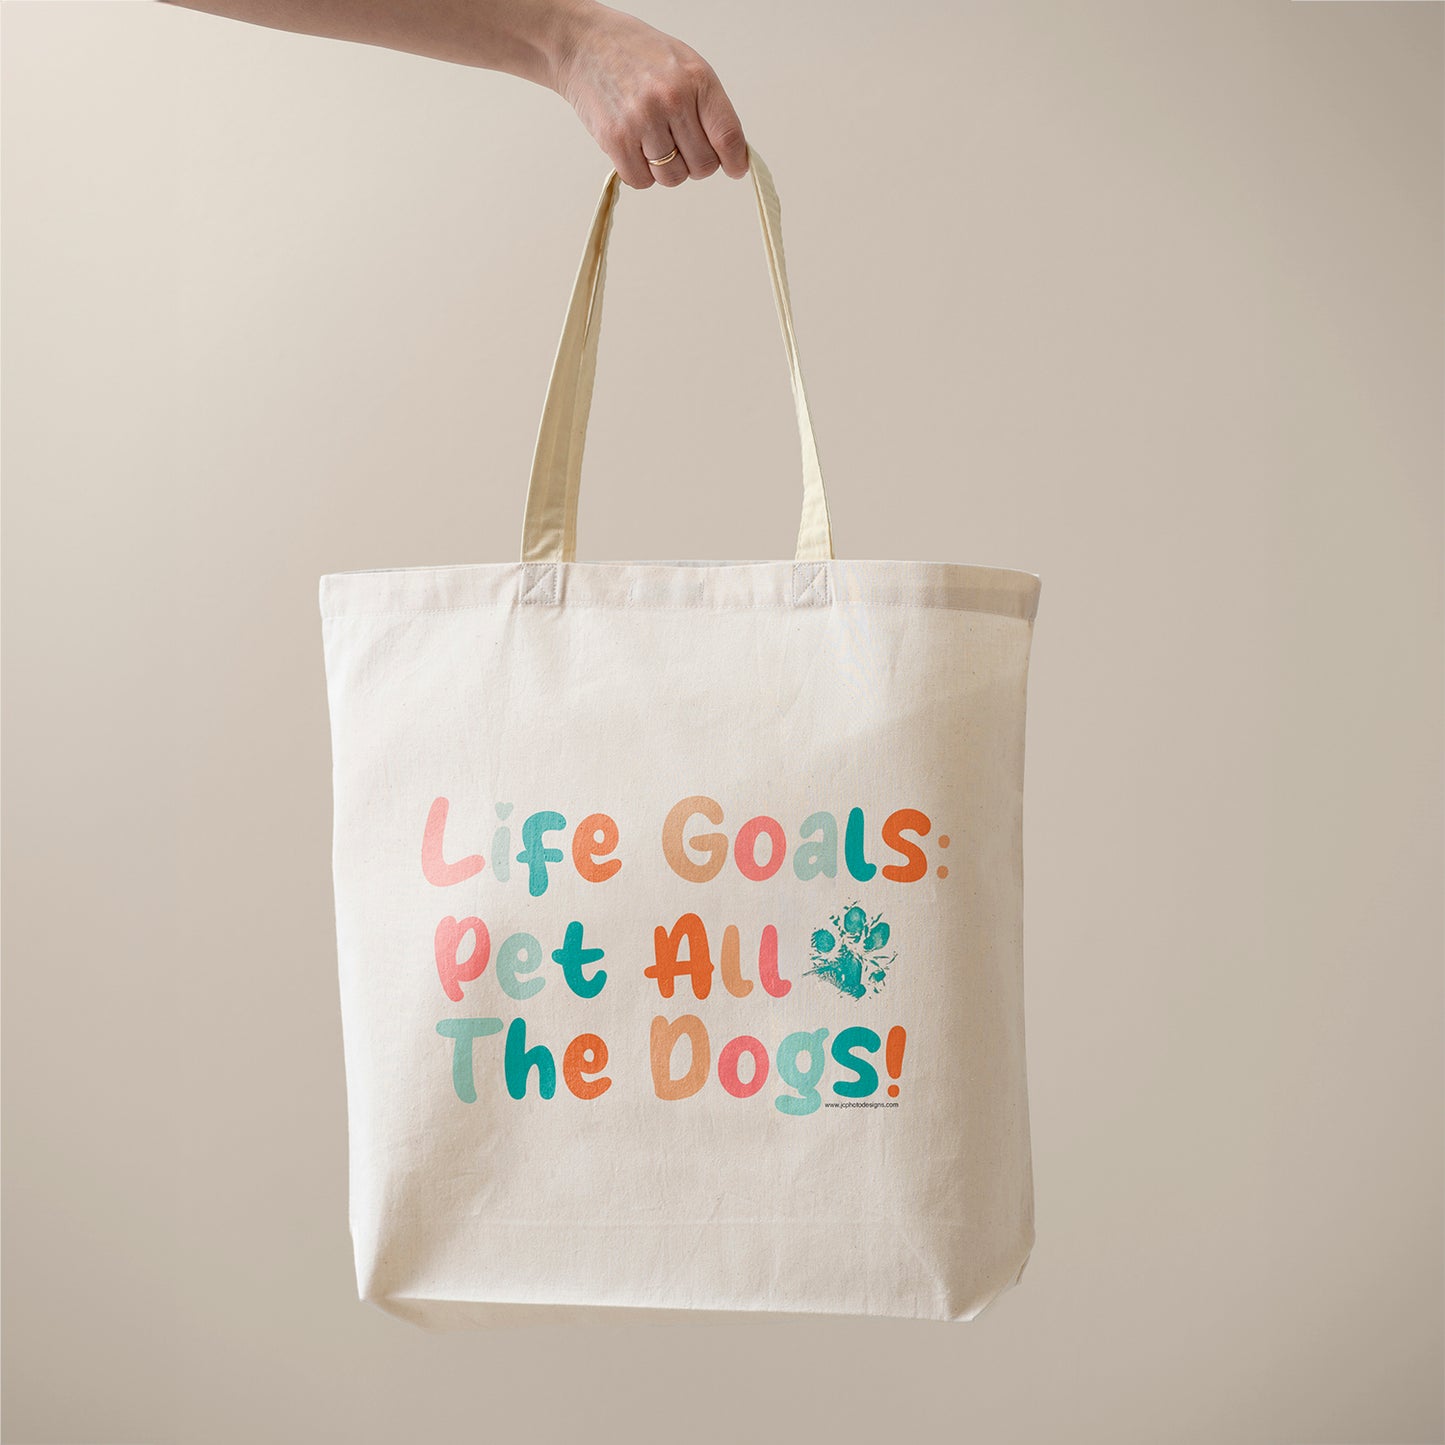 'Life Goals: Pet All the Dogs' Tote Bag